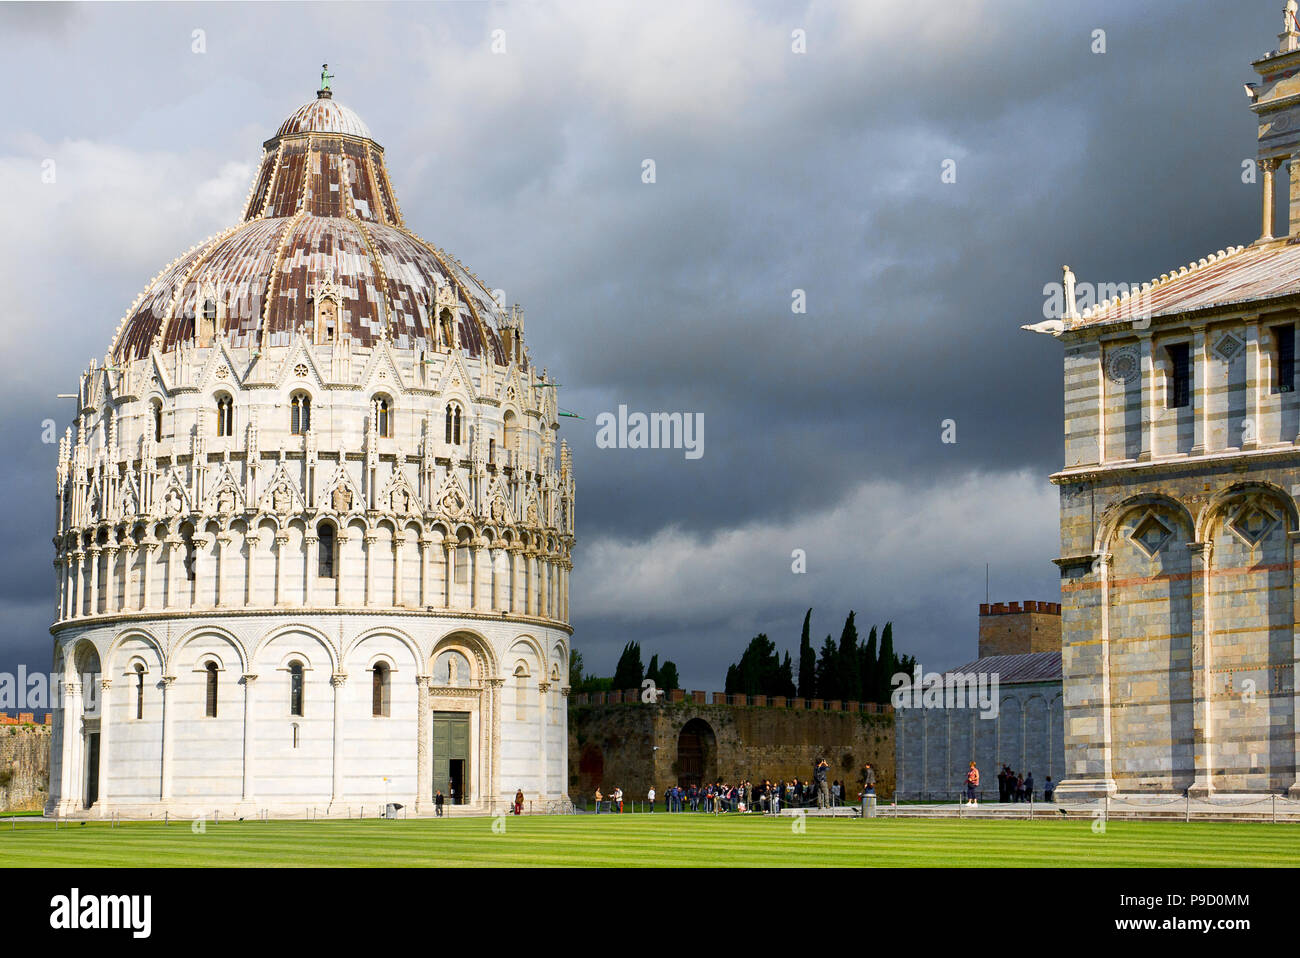 The Pisa Baptistery of St. John and Pisa Cathedral. Grand marble-striped cathedral known for its ornate Romanesque bronze doors & carved 1300s pulpit. Stock Photo